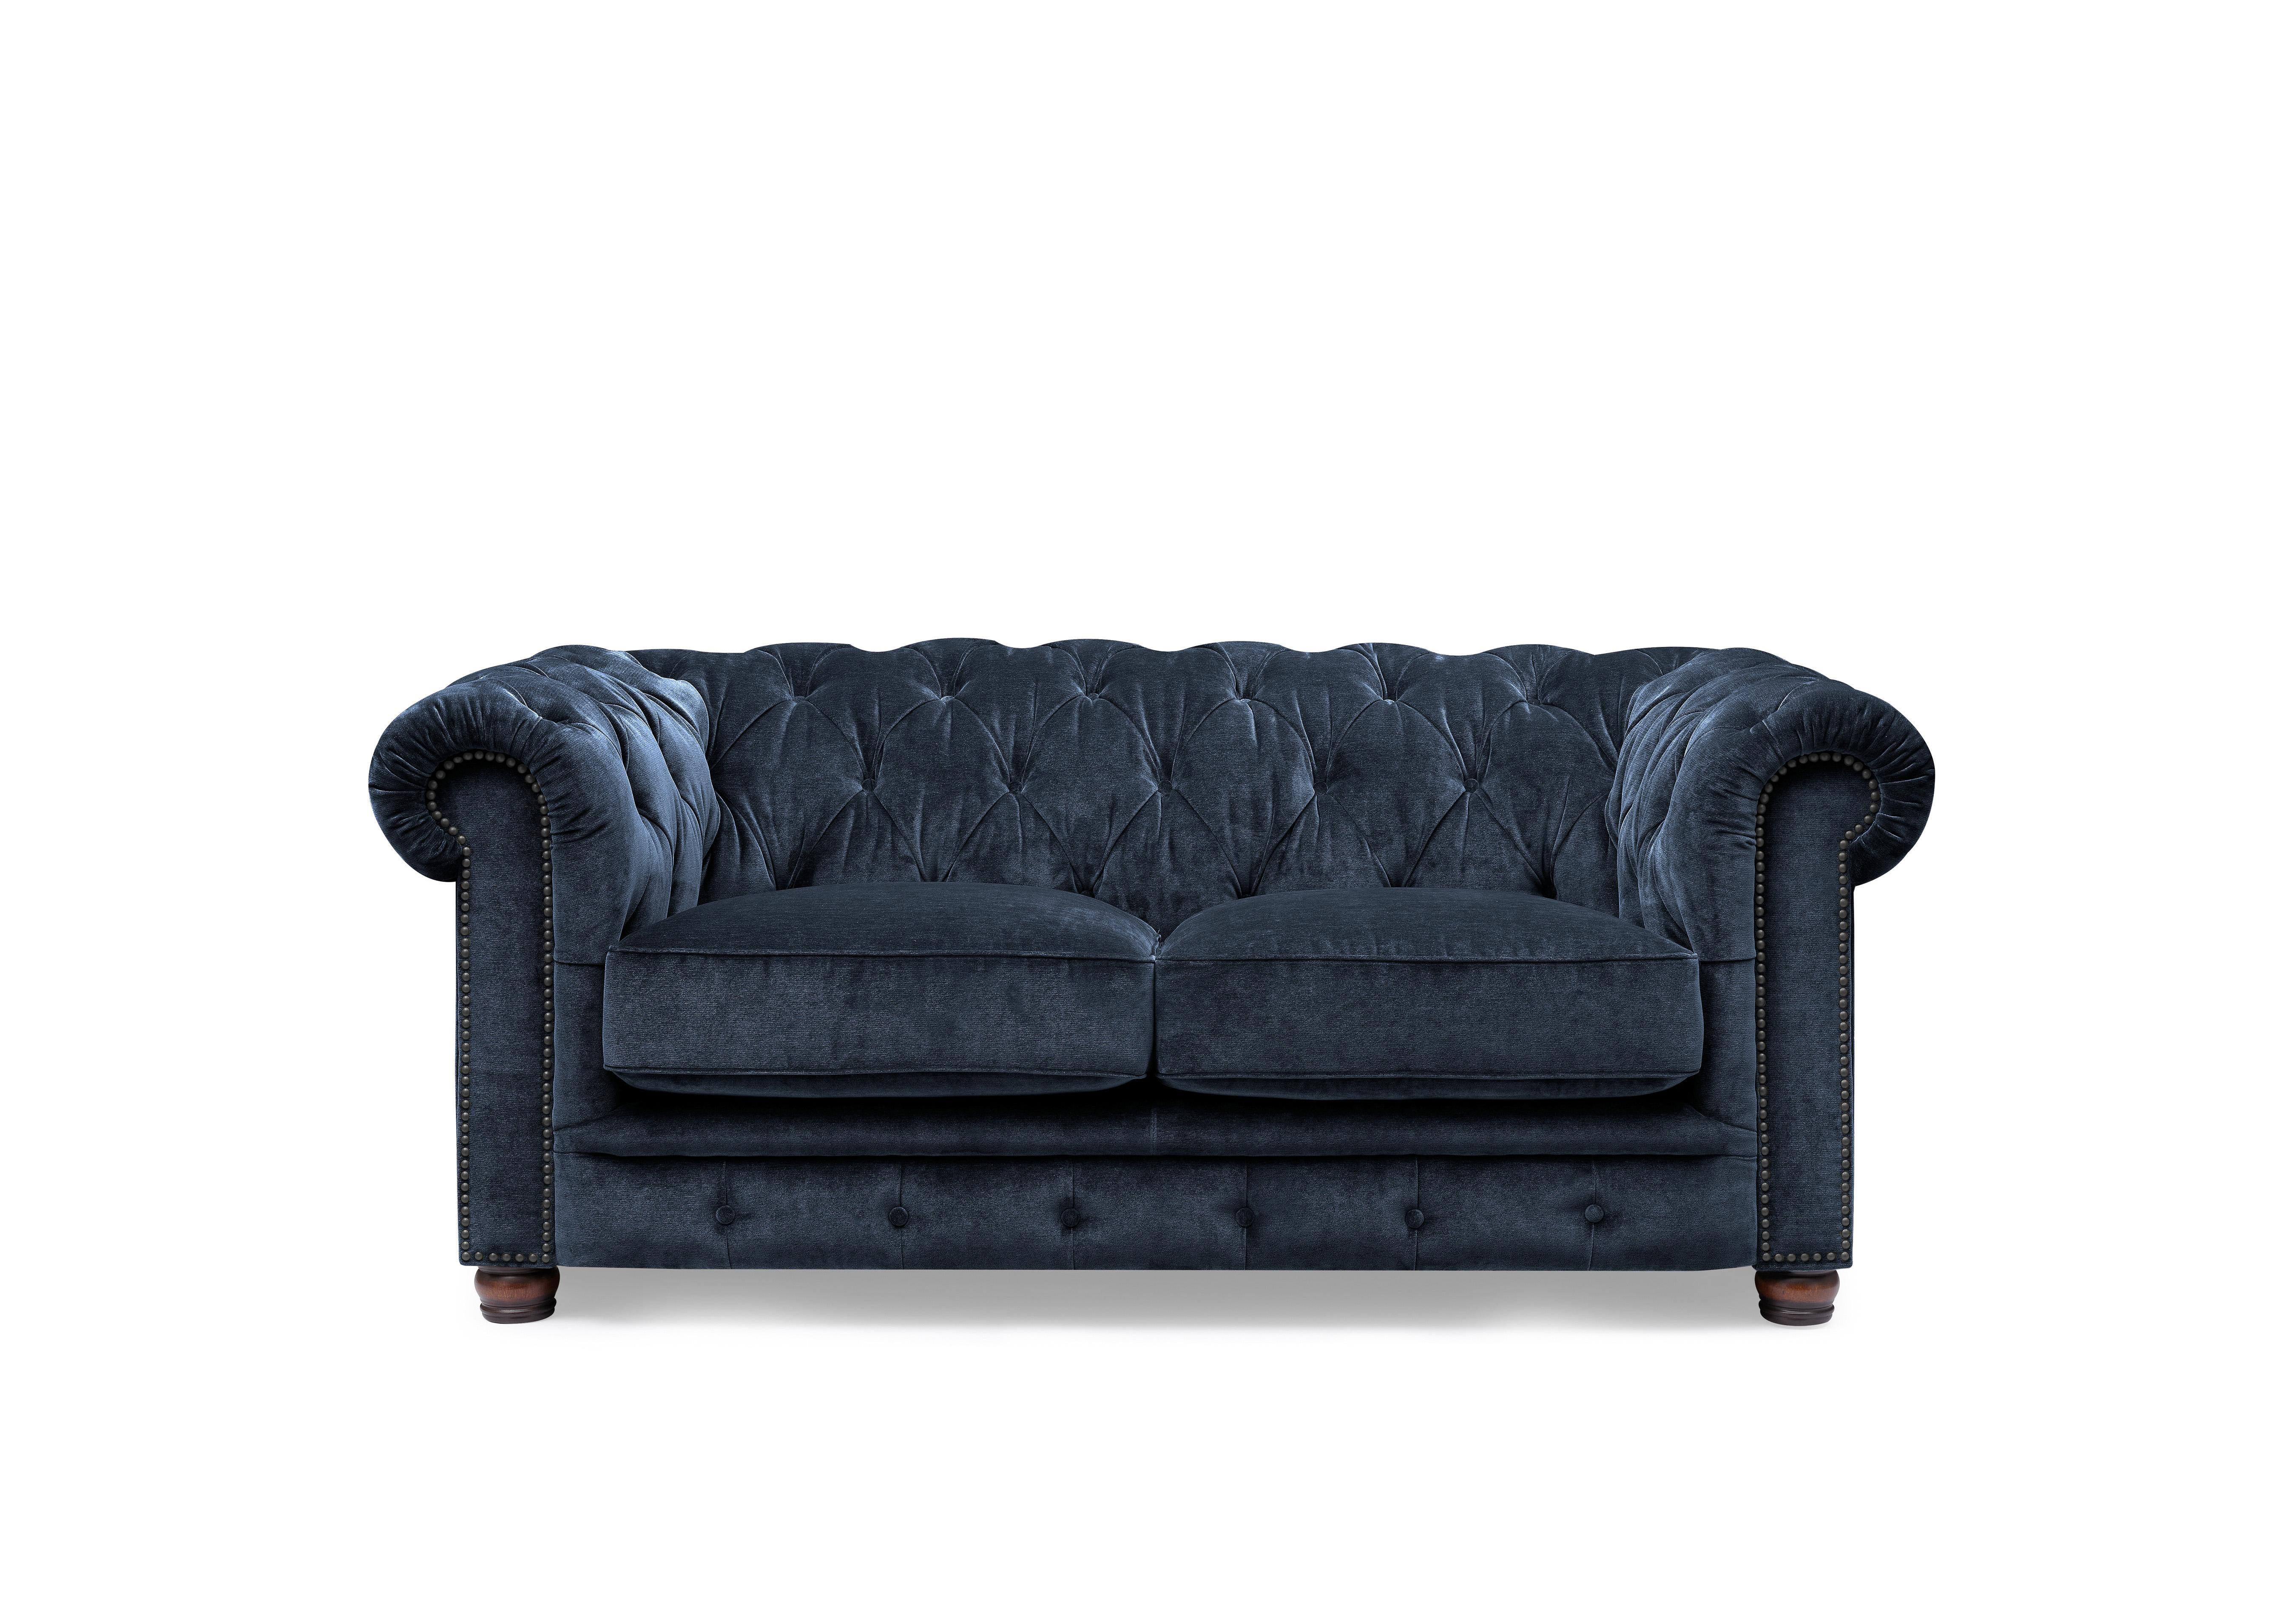 Shackleton 2 Seater Fabric Chesterfield Sofa with USB-C in X3y2-W024 Midnight on Furniture Village